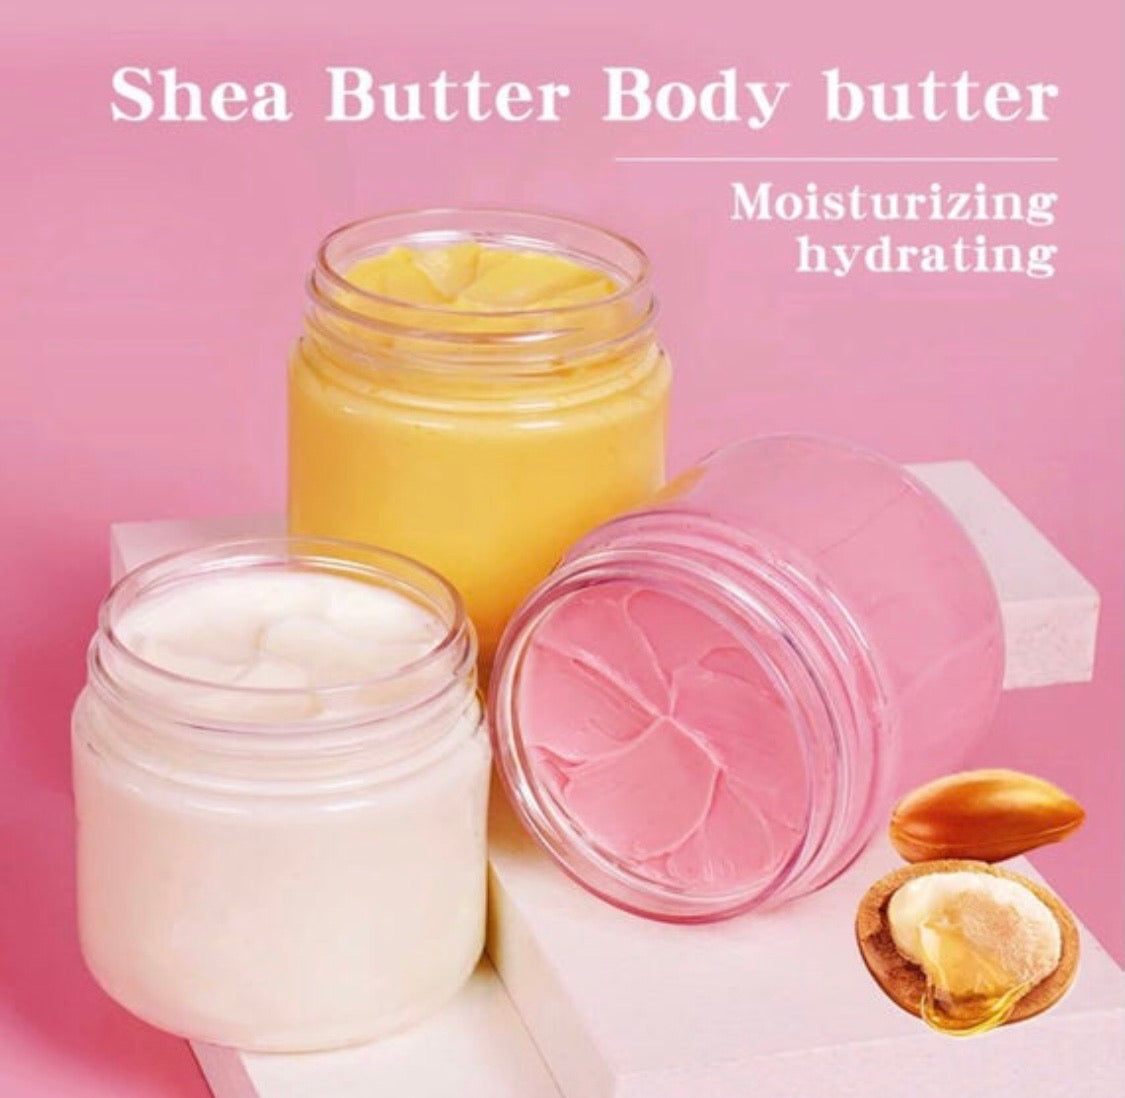 Wholesale 200ml, 10 Piece Whipped Body Butters 3 Type, (Vanilla, Coconut, Rose) Non Greasy, Brightening, Moisturizing,Hydrating (No Logo)